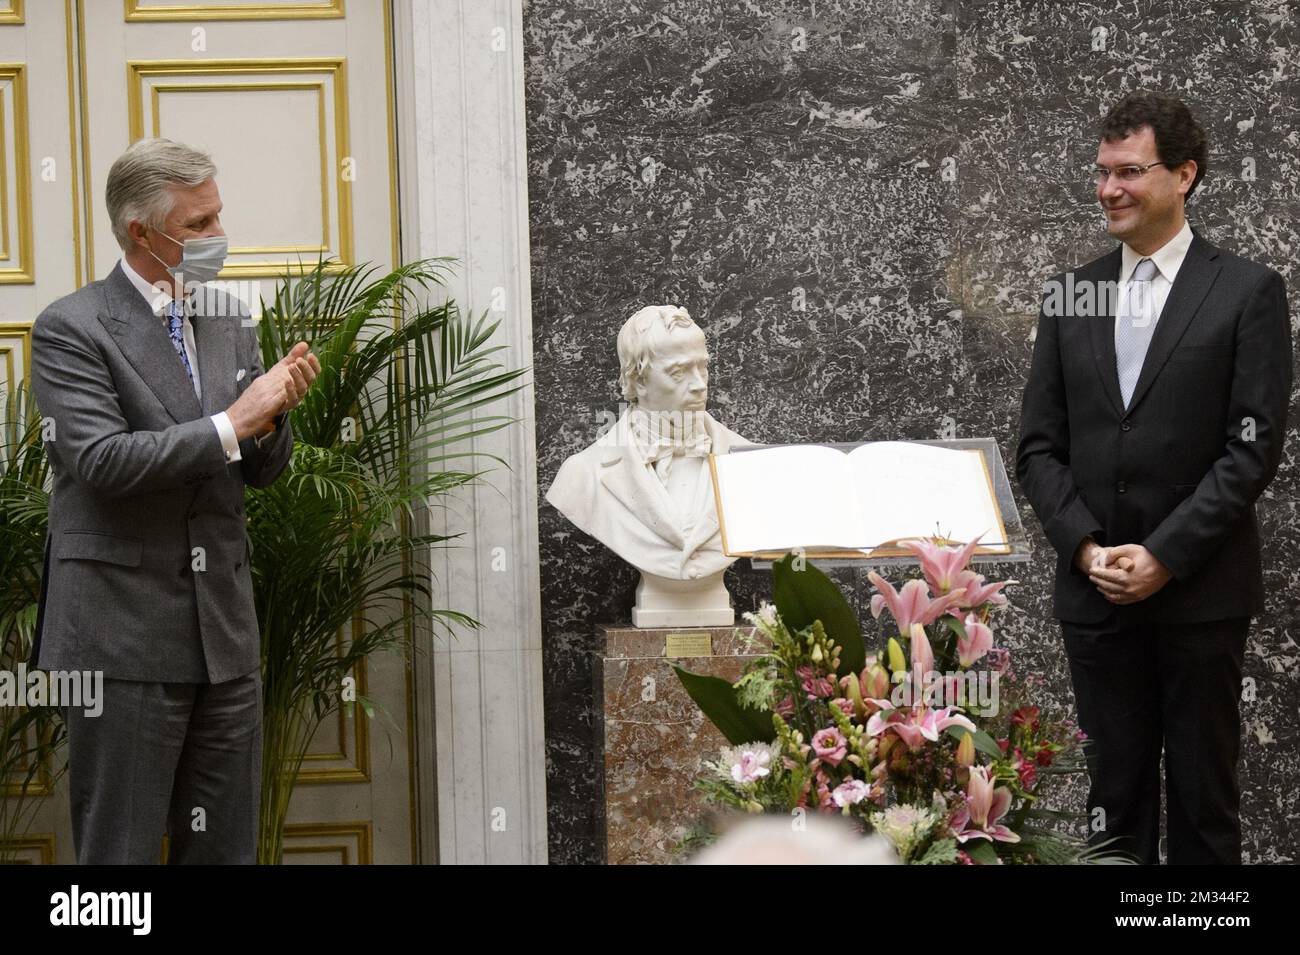 King Philippe - Filip of Belgium and professor Bart Loeys pictured at a ceremony to award the 'Francqui-Collen Prize 2020', Wednesday 16 December 2020, in Brussels. The scientific prize, which is often referred to as the 'Belgian Nobel Prize', is awarded by The Francqui Foundation and is worth 250.000 euros. BELGA PHOTO POOL CHRISTOPHE LICOPPE  Stock Photo